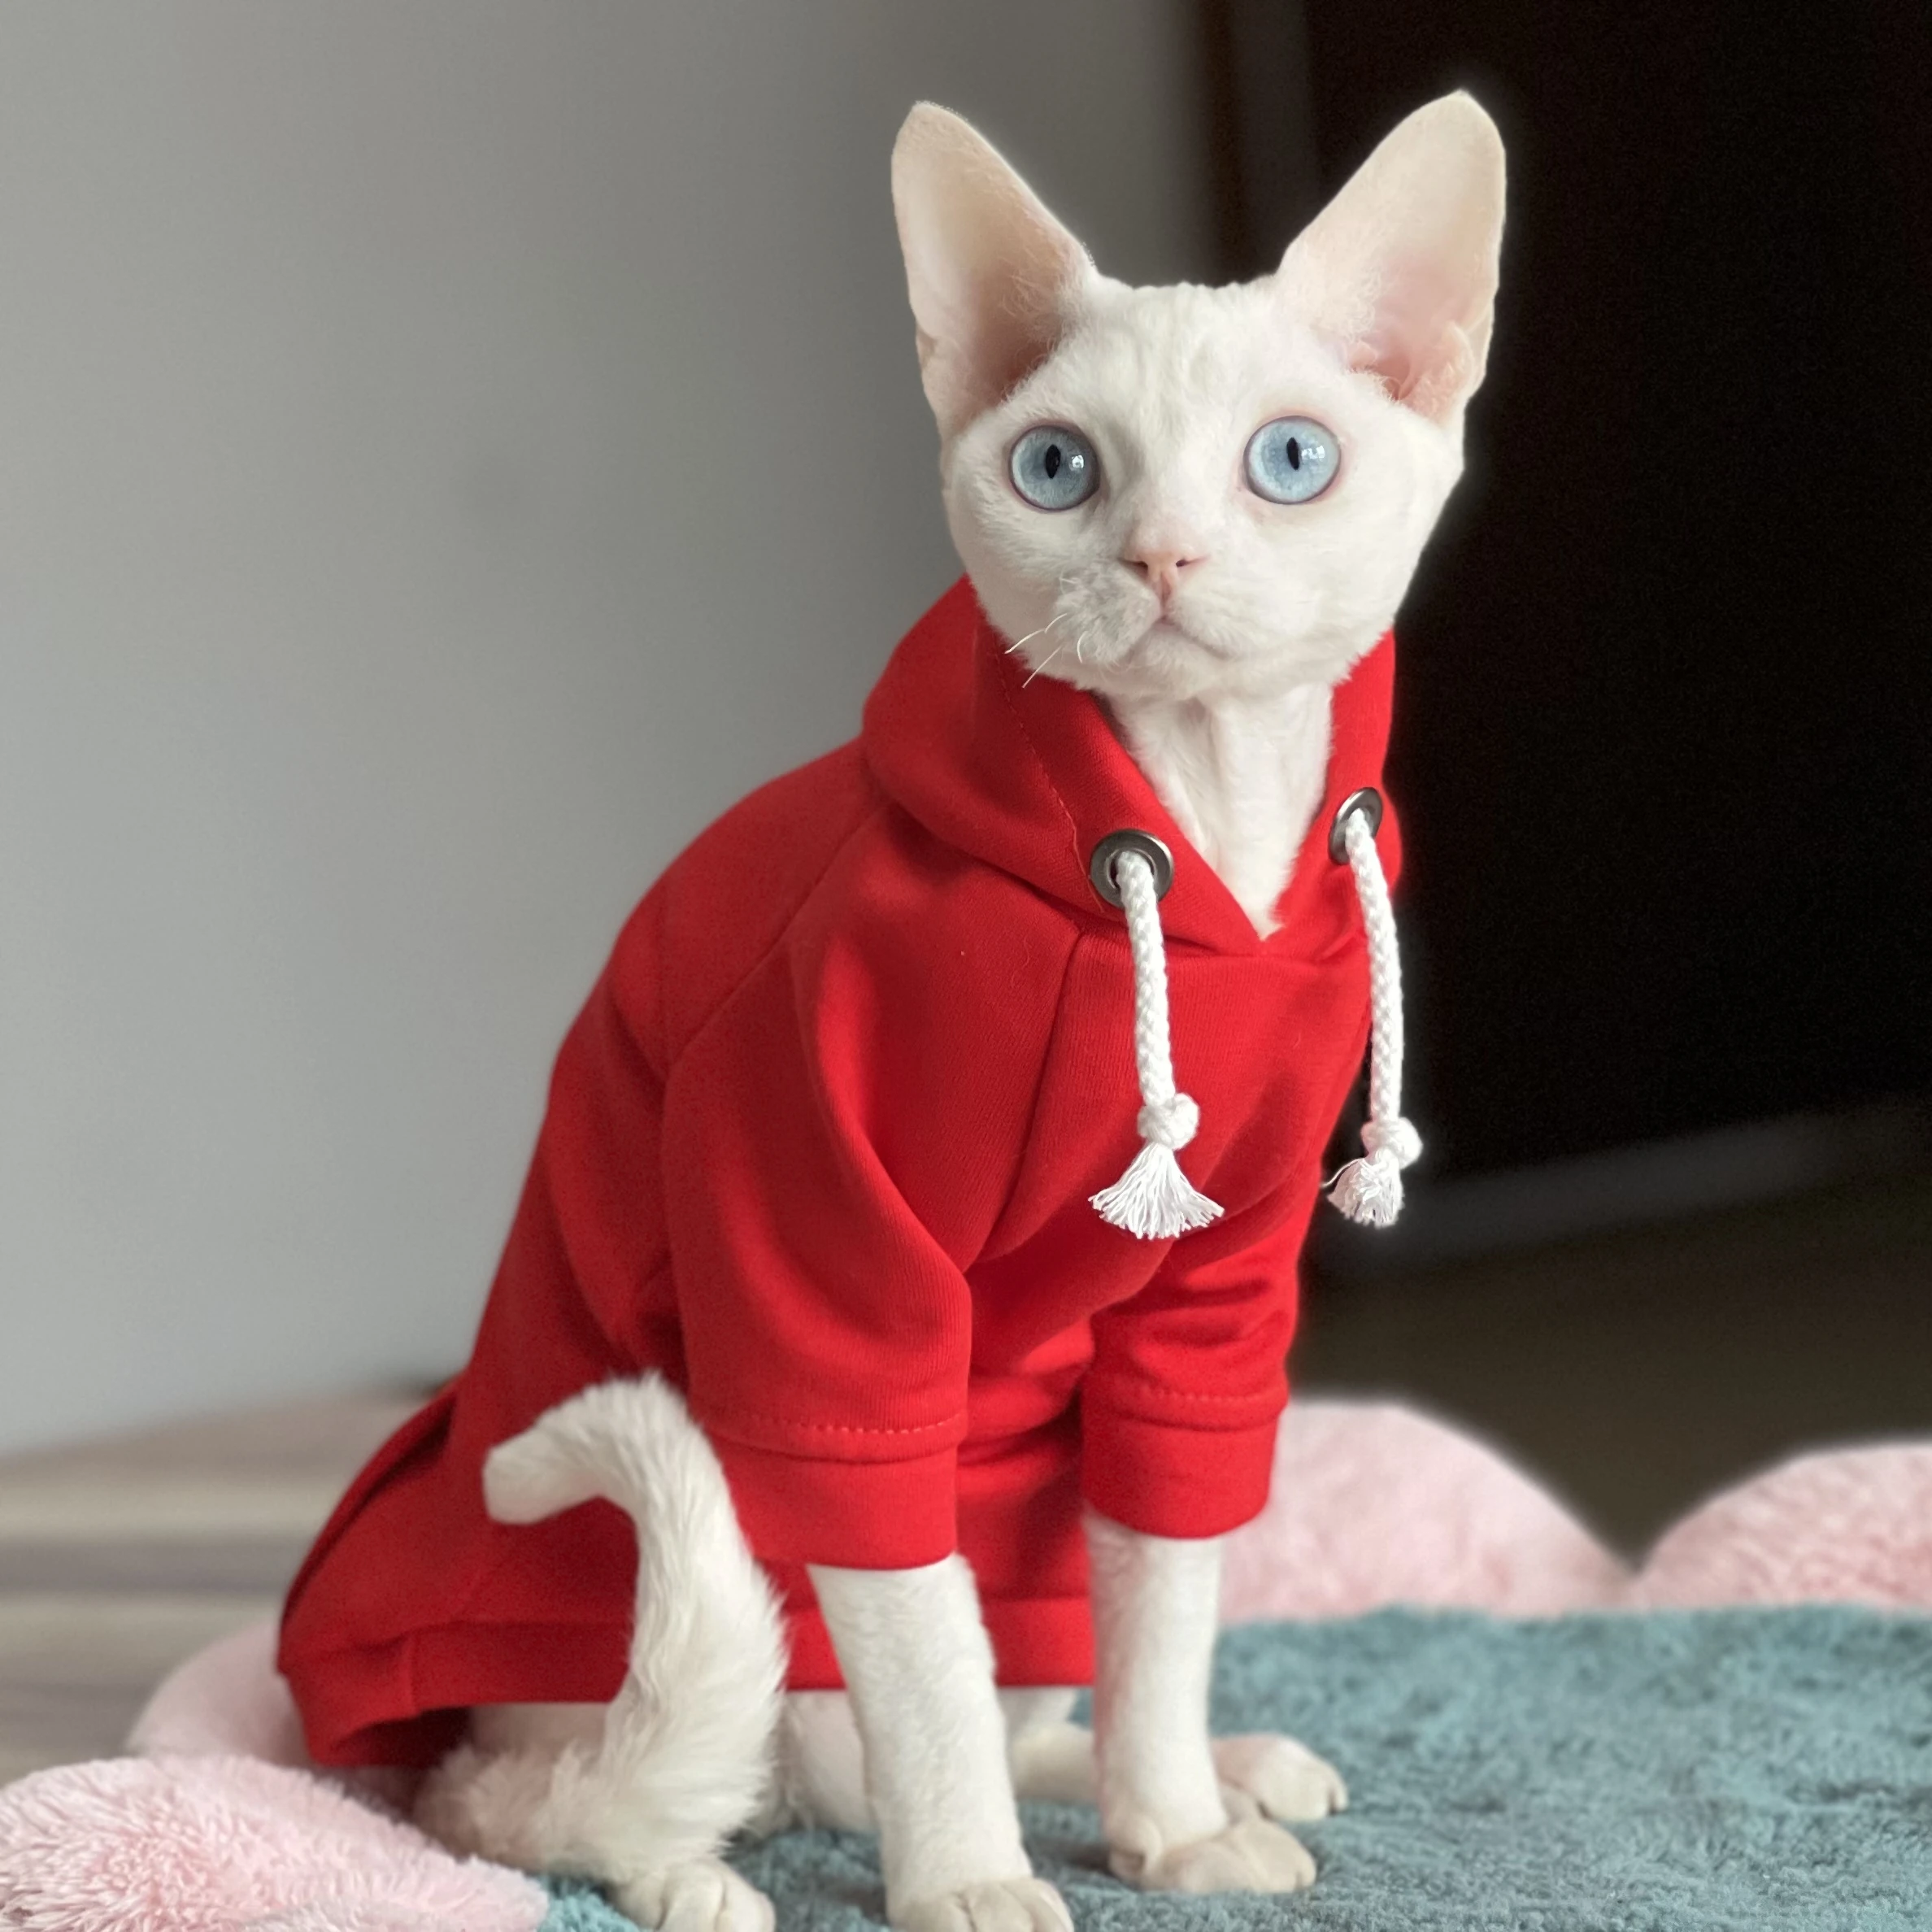 C&C Red Sphinx Devon Rex cat clothes cotton Spring autumn warm Kitty shirt Kitty Pet Apparel for Cat Sphynx Hairelss Cat Clothes